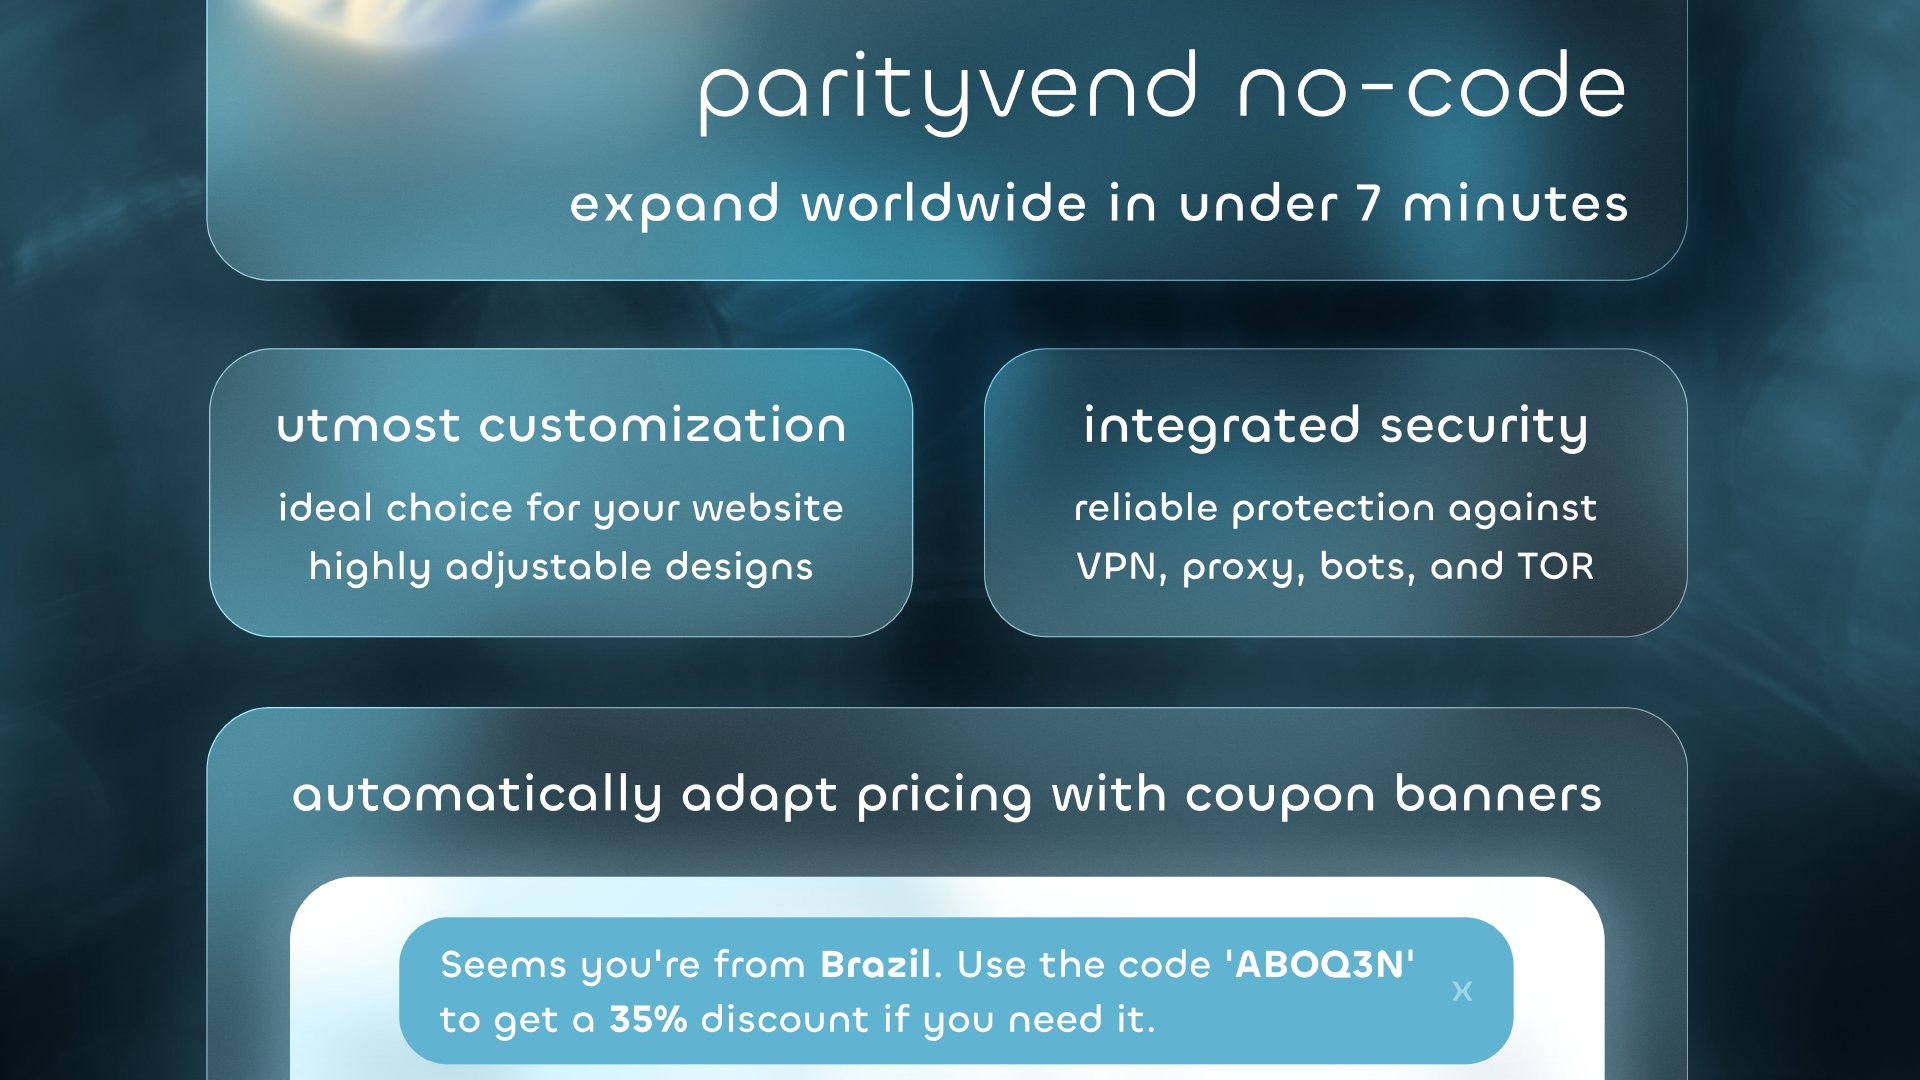 ParityVend No-Code. Expand worldwide in under 7 minutes. Utmost customization. Ideal choice for your website with highly adjustable designs. Integrated security, reliable protection against VPN, proxy, bots, and TOR. Automatically adapt pricing with coupon banners. A banner example is displayed. Below the banner is a text box that says: 'Seems you're from Brazil, use the code AQ3DN to get a 35% discount if you need it.'